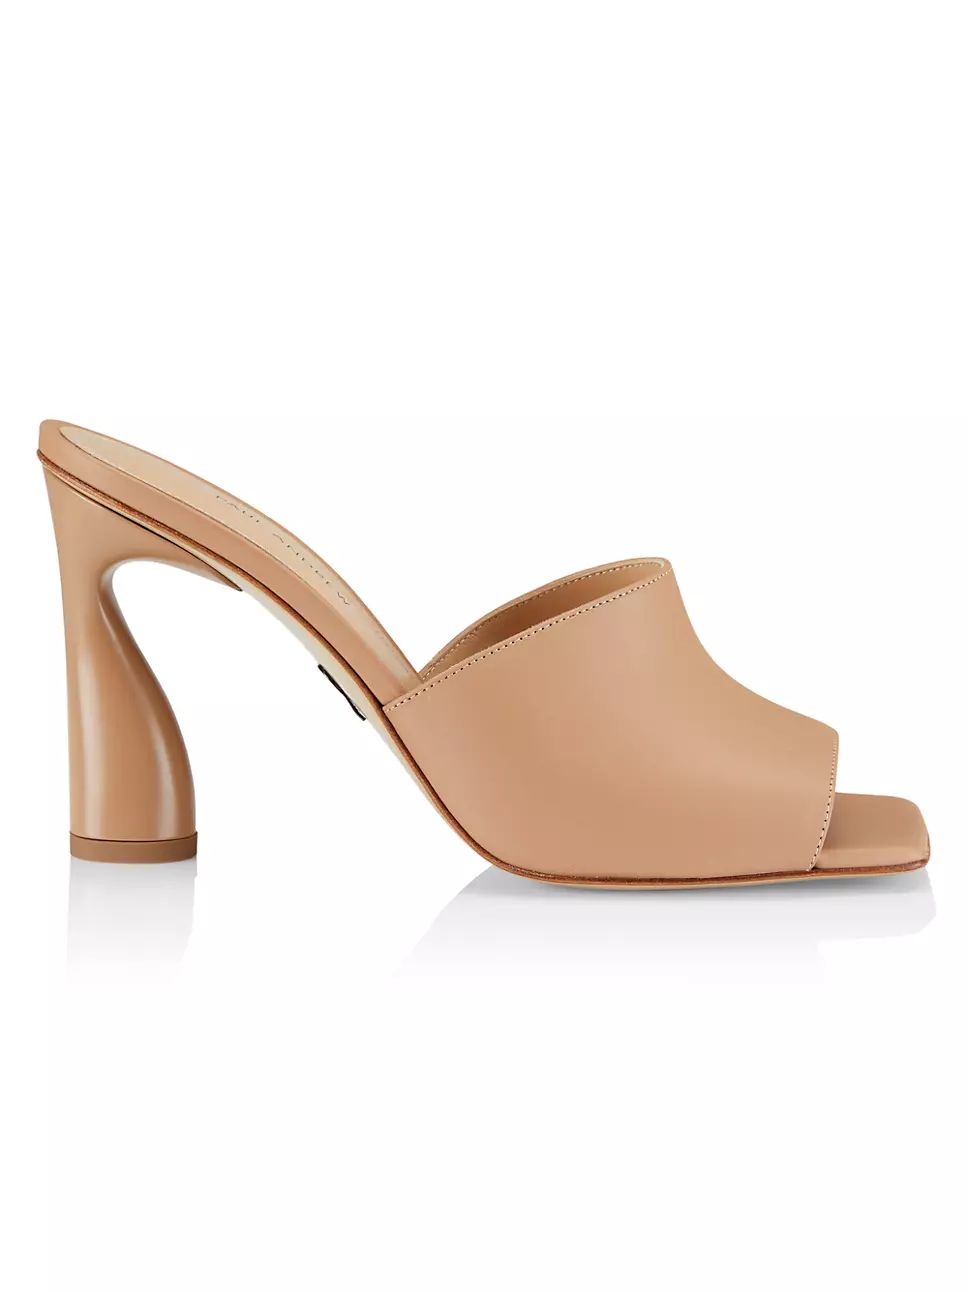 Paul Andrew Arc Leather Mules | Saks Fifth Avenue